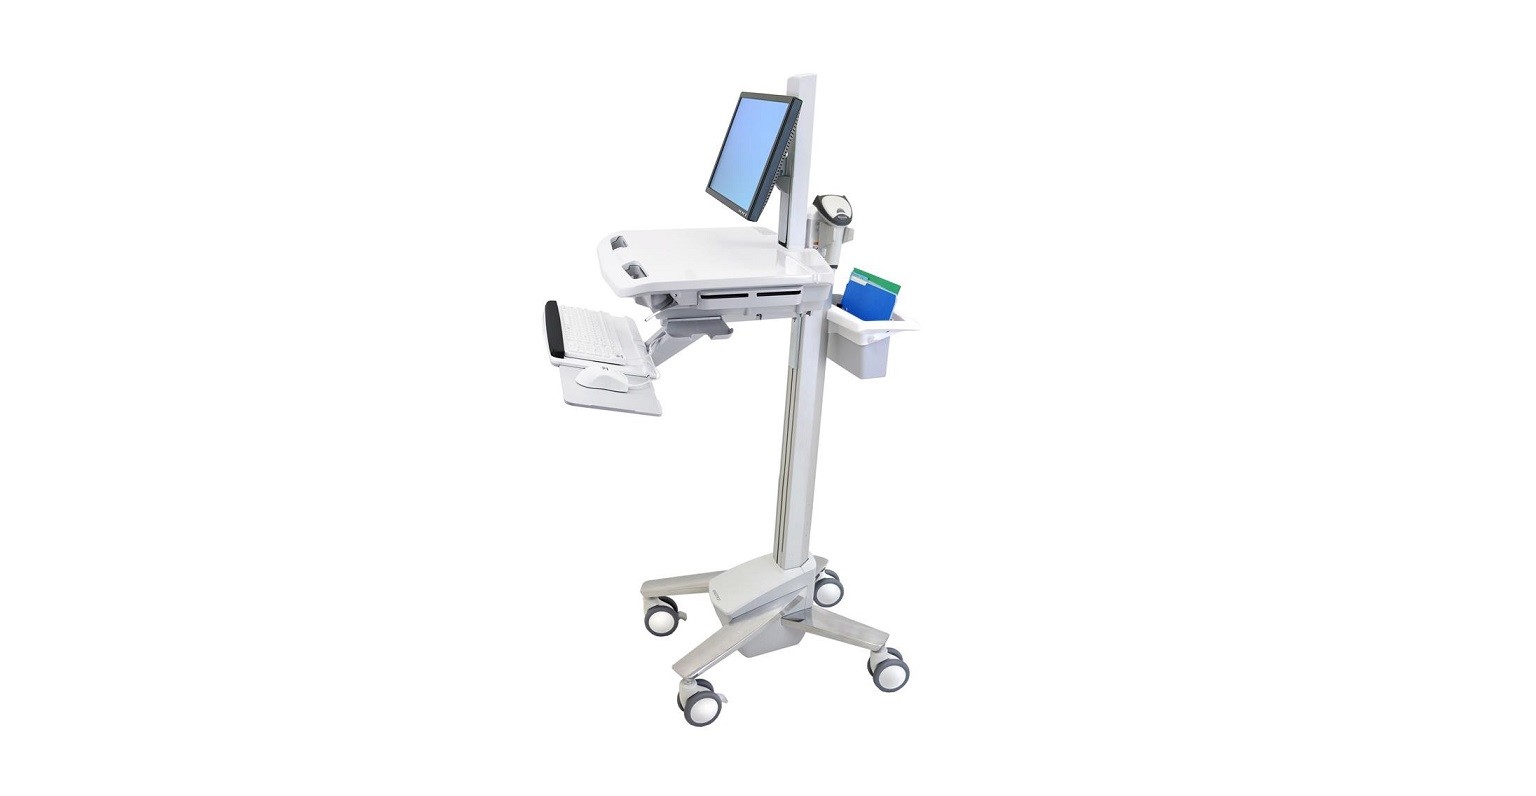 Ergotron SV41-6300-0 Styleview Emr Cart With LCD Pivot 35 LB Capacity